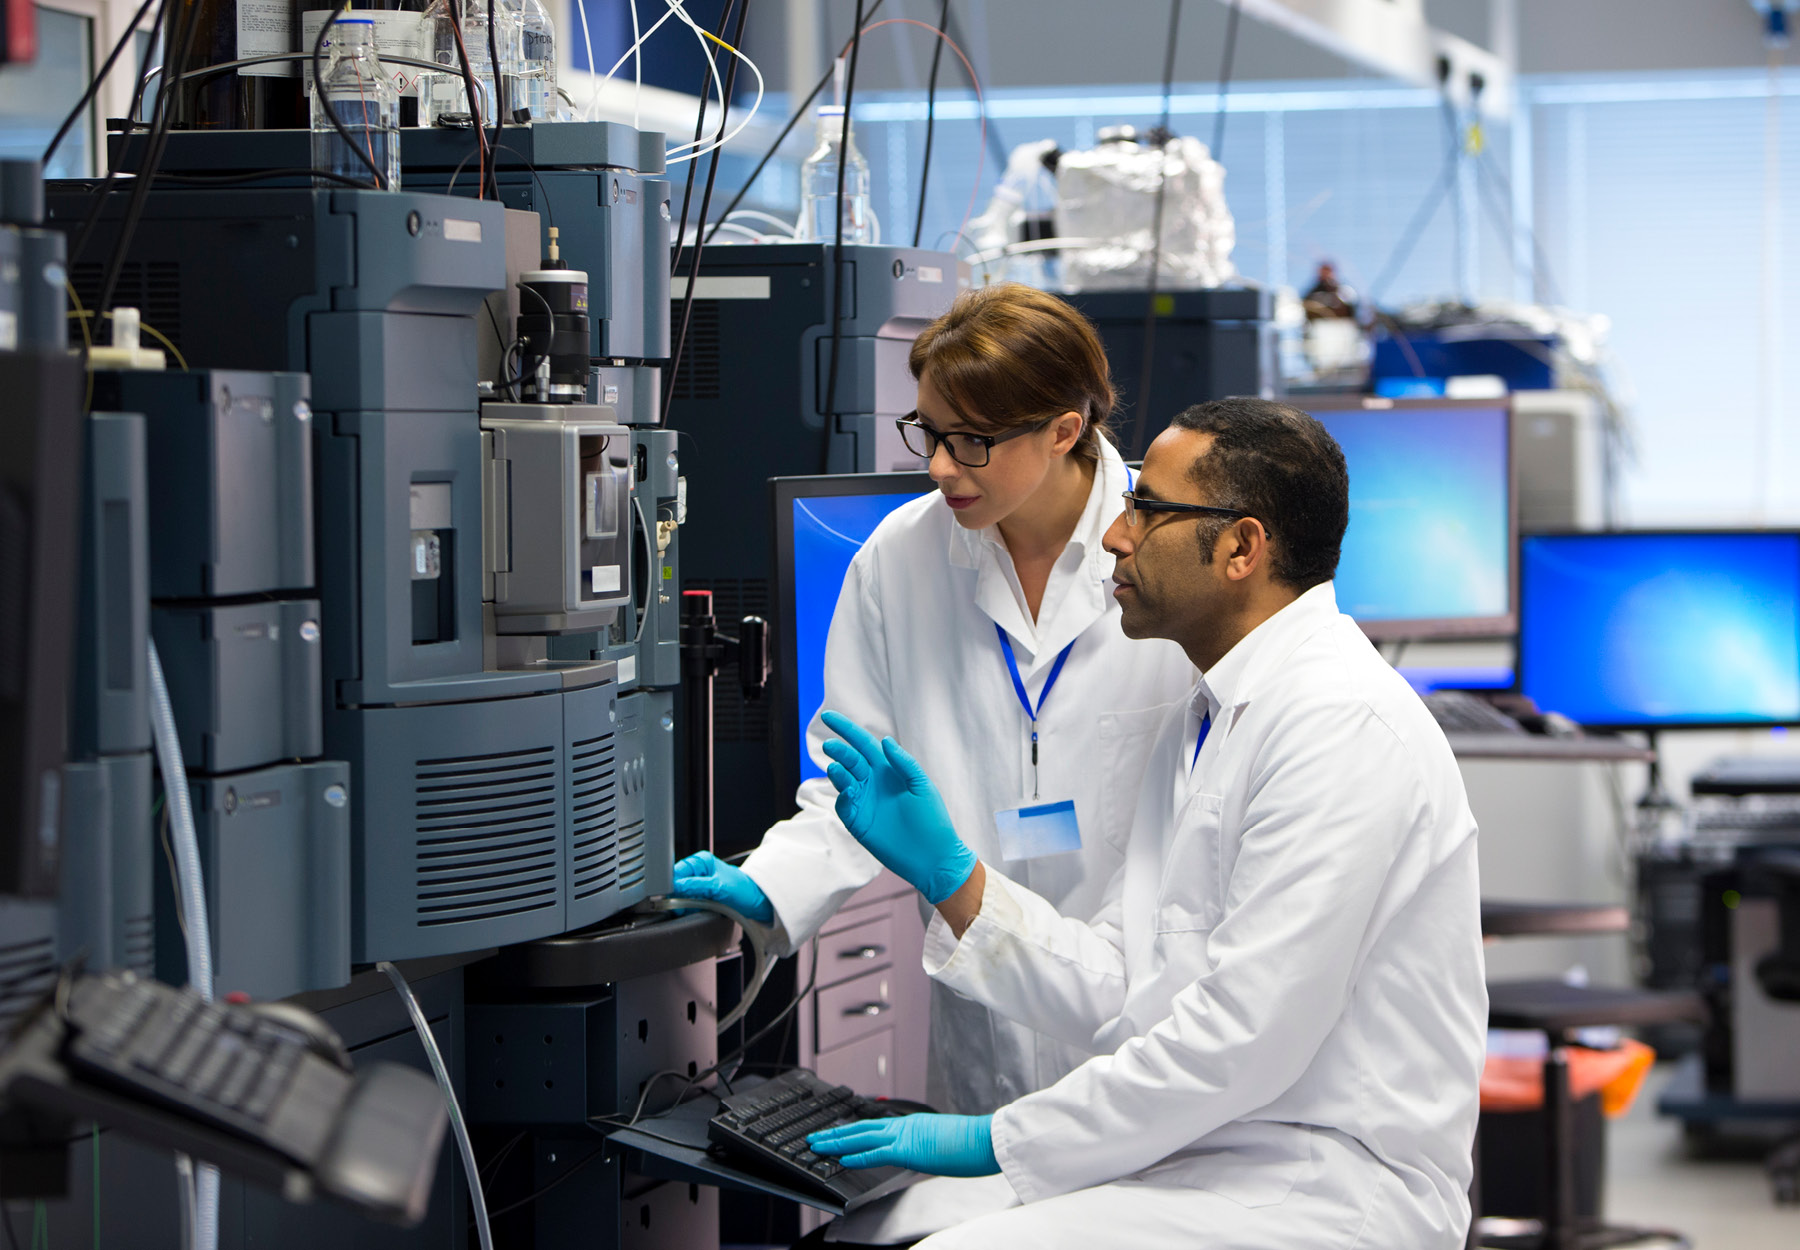 Scientists in a laboratory recording data. Both working beside a special piece of machinery called a mass spectrometer (MS) , an analytical chemistry technique that helps identify the amount and type of chemicals present in a sample by measuring the mass-to-charge ratio and abundance of gas-phase ions. Stock image.